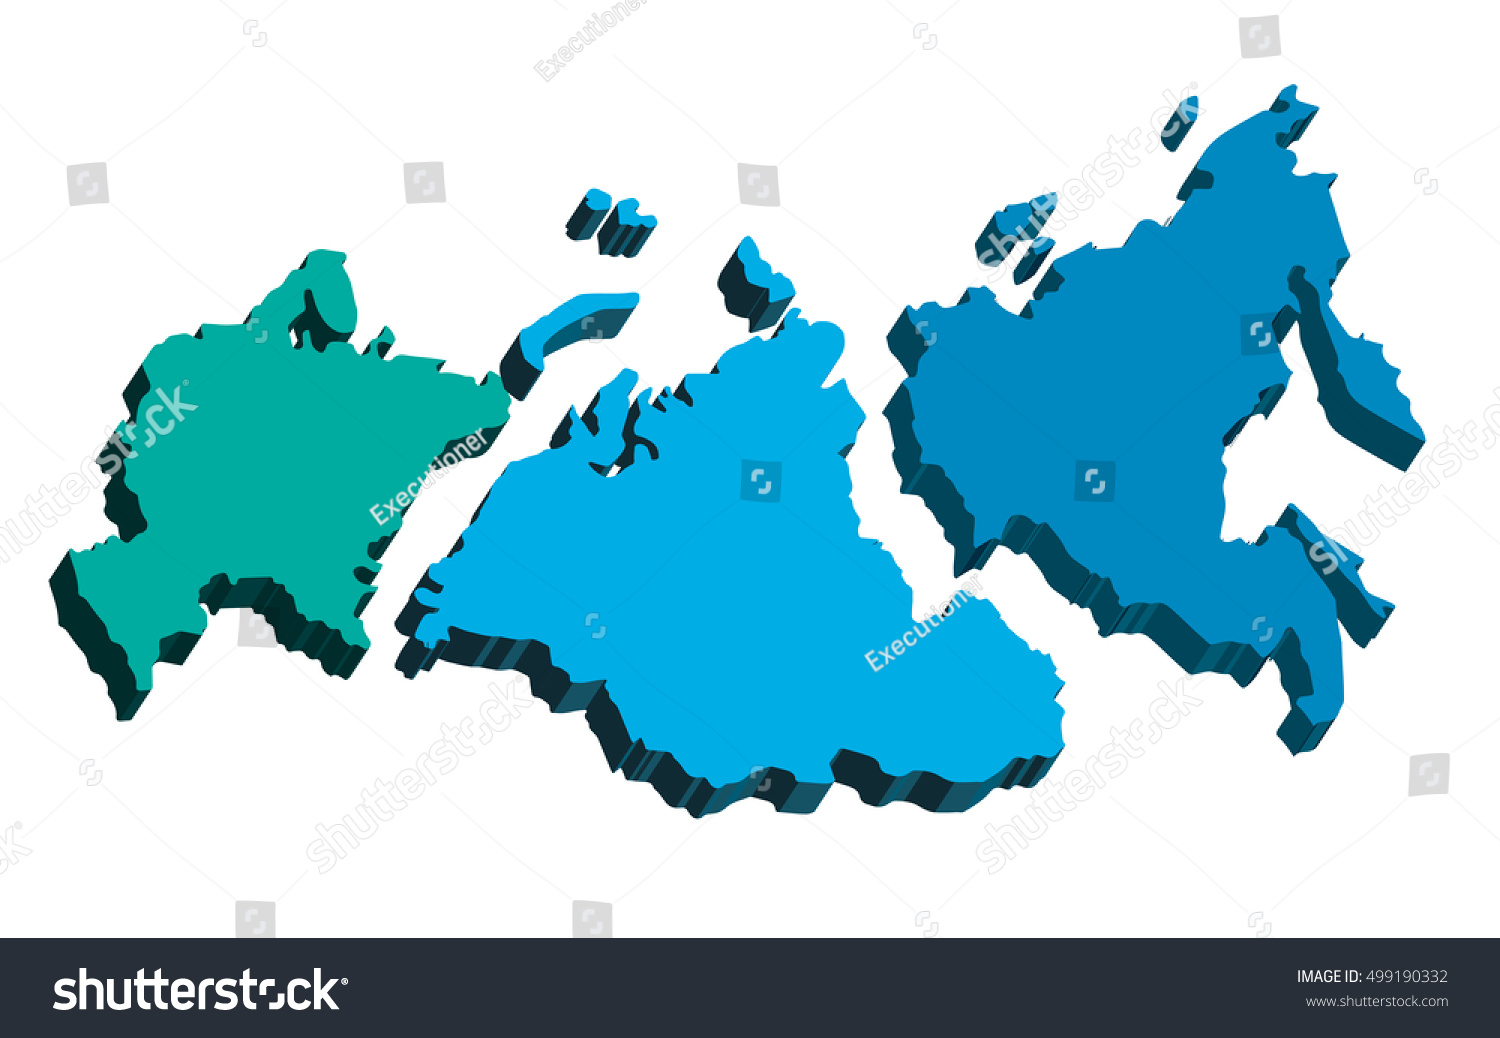 Map Russia Divided Into Parts European Stock Vector Royalty Free 499190332 4604